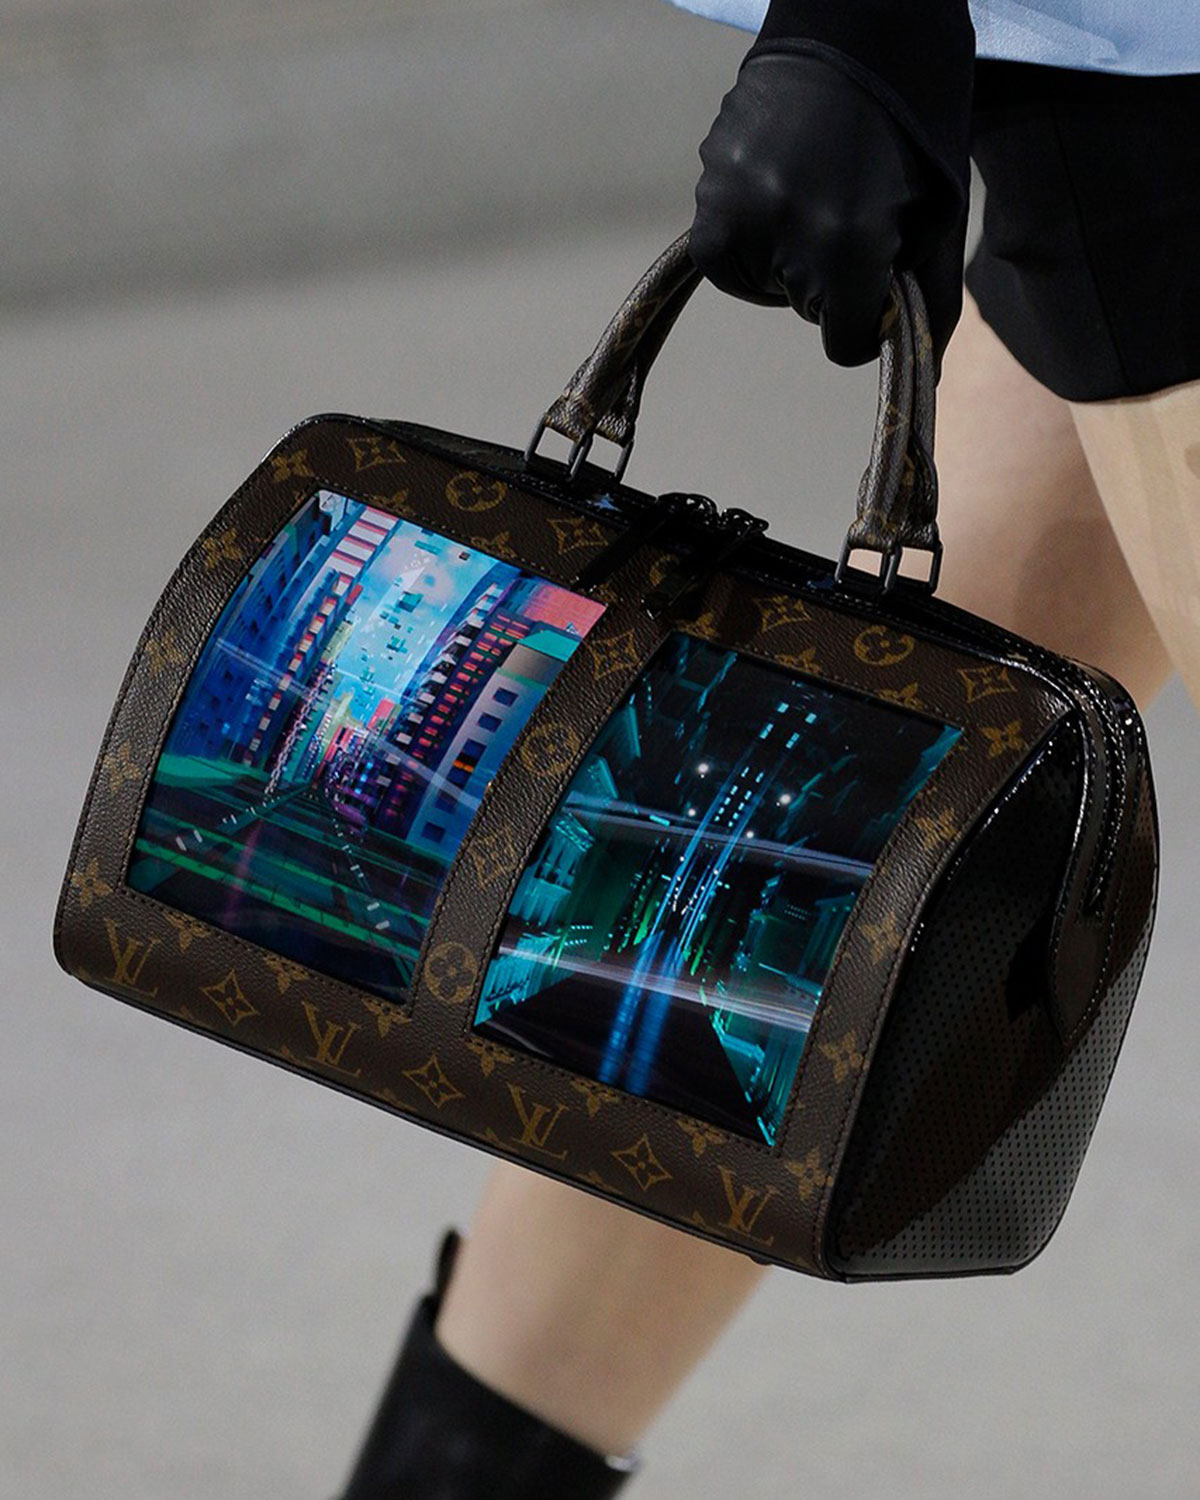 Time travelling with Louis Vuitton